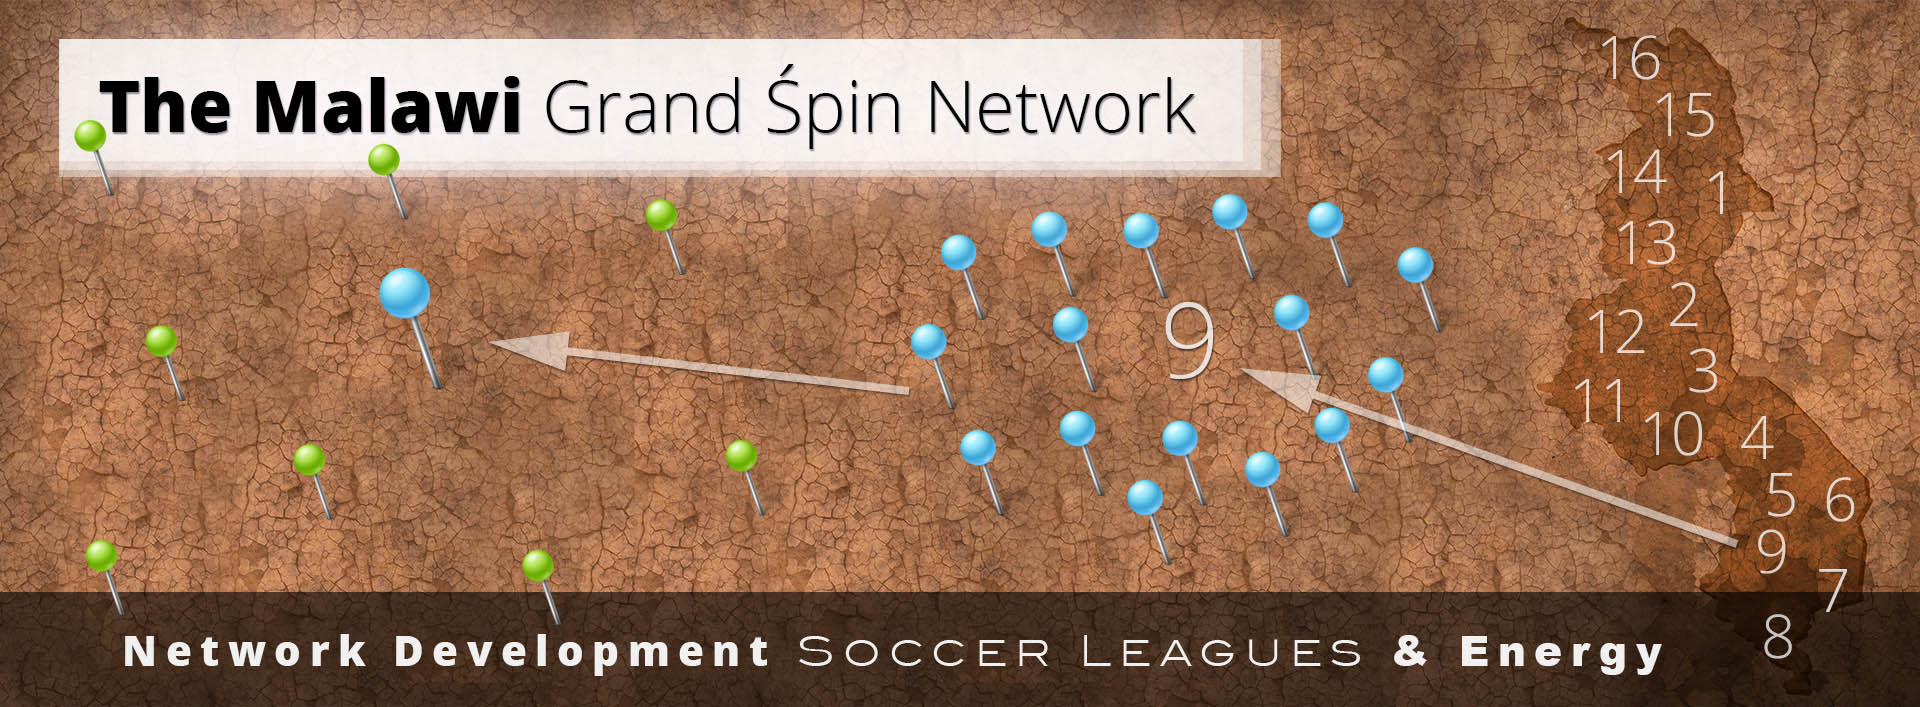 Malawi__Grand-Spin-Network__Network-Development__Soccer-Leagues_&_Energy